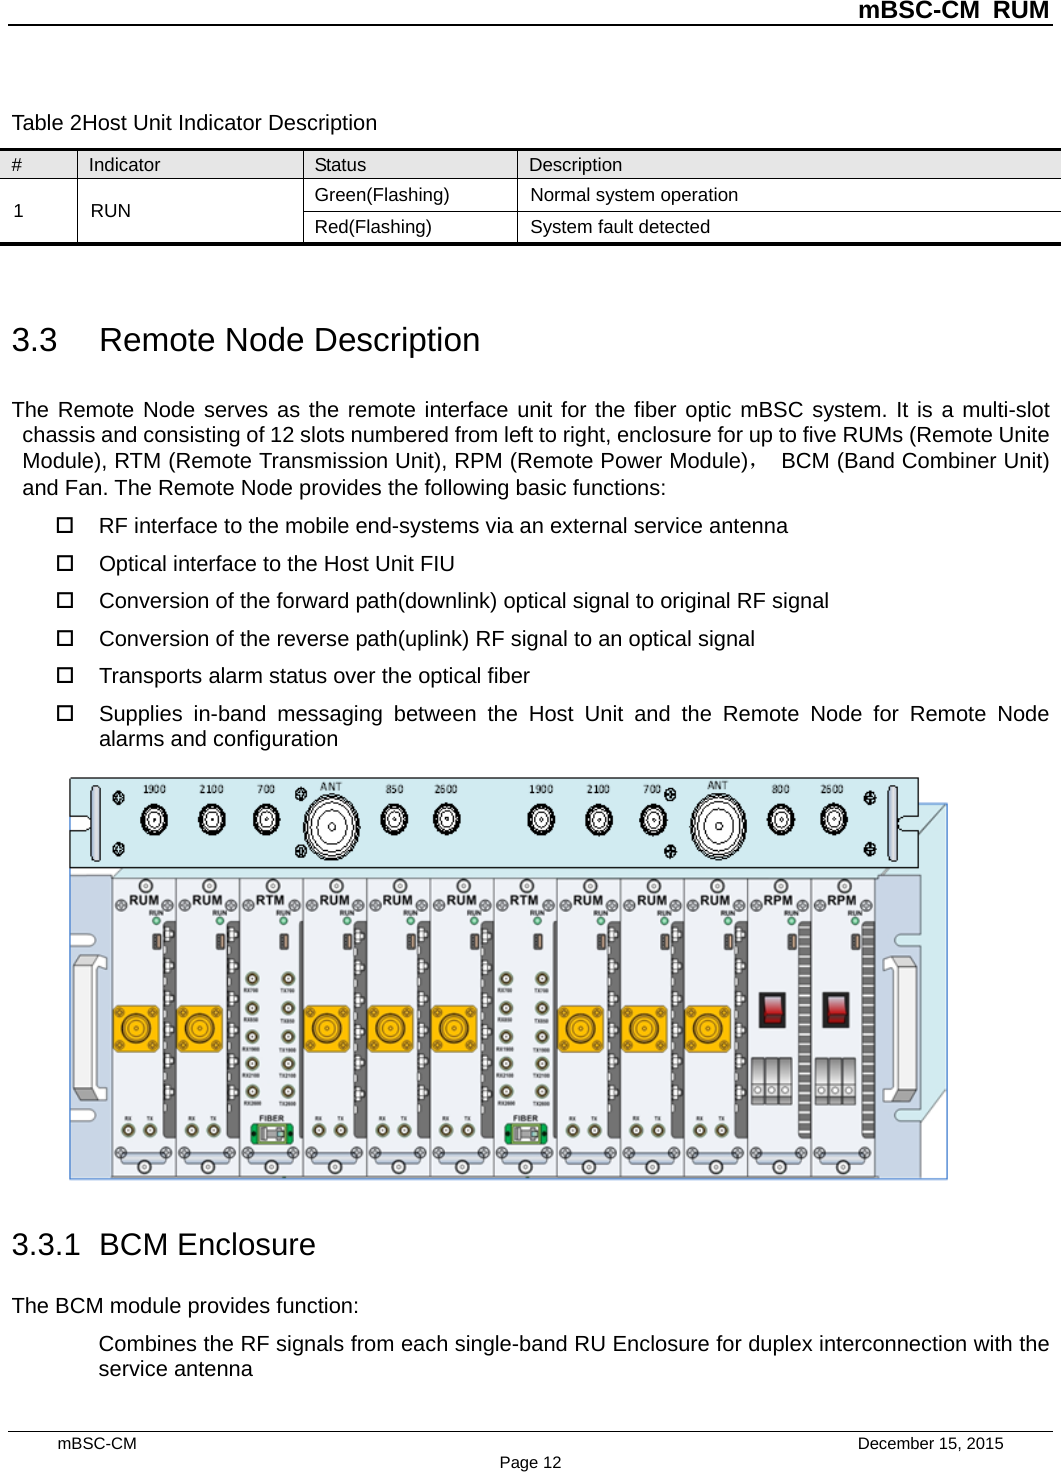          mBSC-CM RUM   mBSC-CM                                 December 15, 2015 Page 12 Table 2Host Unit Indicator Description # Indicator Status Description 1  RUN Green(Flashing) Normal system operation Red(Flashing)  System fault detected  3.3 Remote Node Description The Remote Node serves as the remote interface unit for the fiber optic mBSC system. It is a multi-slot chassis and consisting of 12 slots numbered from left to right, enclosure for up to five RUMs (Remote Unite Module), RTM (Remote Transmission Unit), RPM (Remote Power Module)， BCM (Band Combiner Unit) and Fan. The Remote Node provides the following basic functions:  RF interface to the mobile end-systems via an external service antenna  Optical interface to the Host Unit FIU  Conversion of the forward path(downlink) optical signal to original RF signal  Conversion of the reverse path(uplink) RF signal to an optical signal    Transports alarm status over the optical fiber  Supplies in-band messaging between the Host Unit and the Remote Node for Remote Node alarms and configuration  3.3.1 BCM Enclosure The BCM module provides function: Combines the RF signals from each single-band RU Enclosure for duplex interconnection with the service antenna 